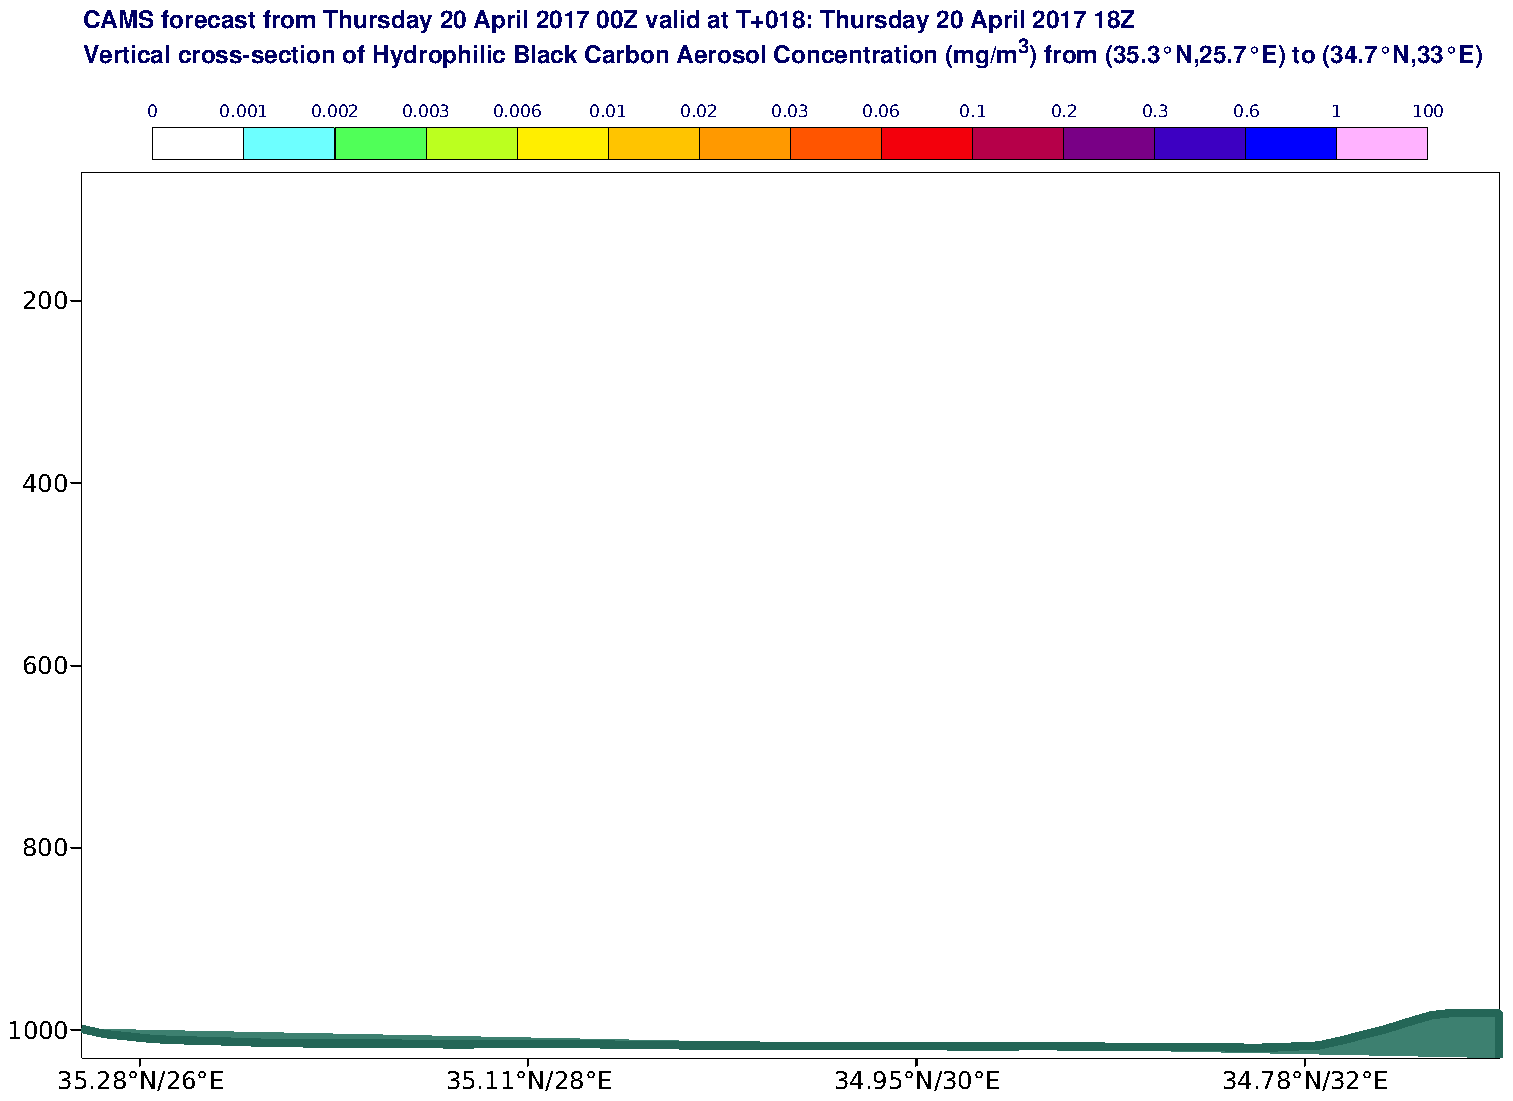 Vertical cross-section of Hydrophilic Black Carbon Aerosol Concentration (mg/m3) valid at T18 - 2017-04-20 18:00